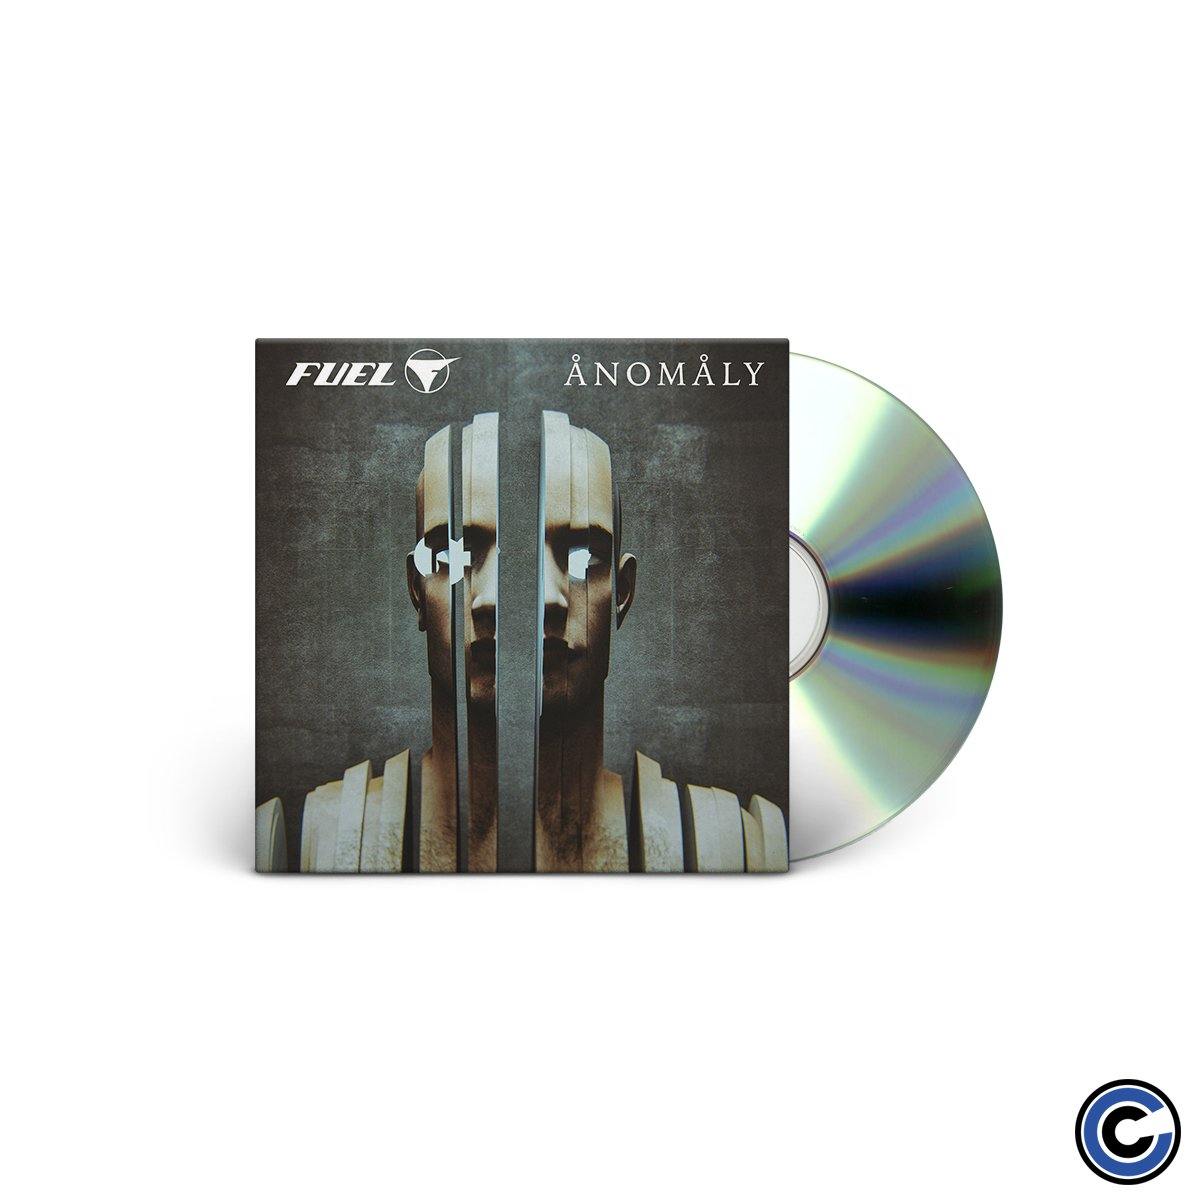 Buy – Fuel "Anomaly" CD – Band & Music Merch – Cold Cuts Merch